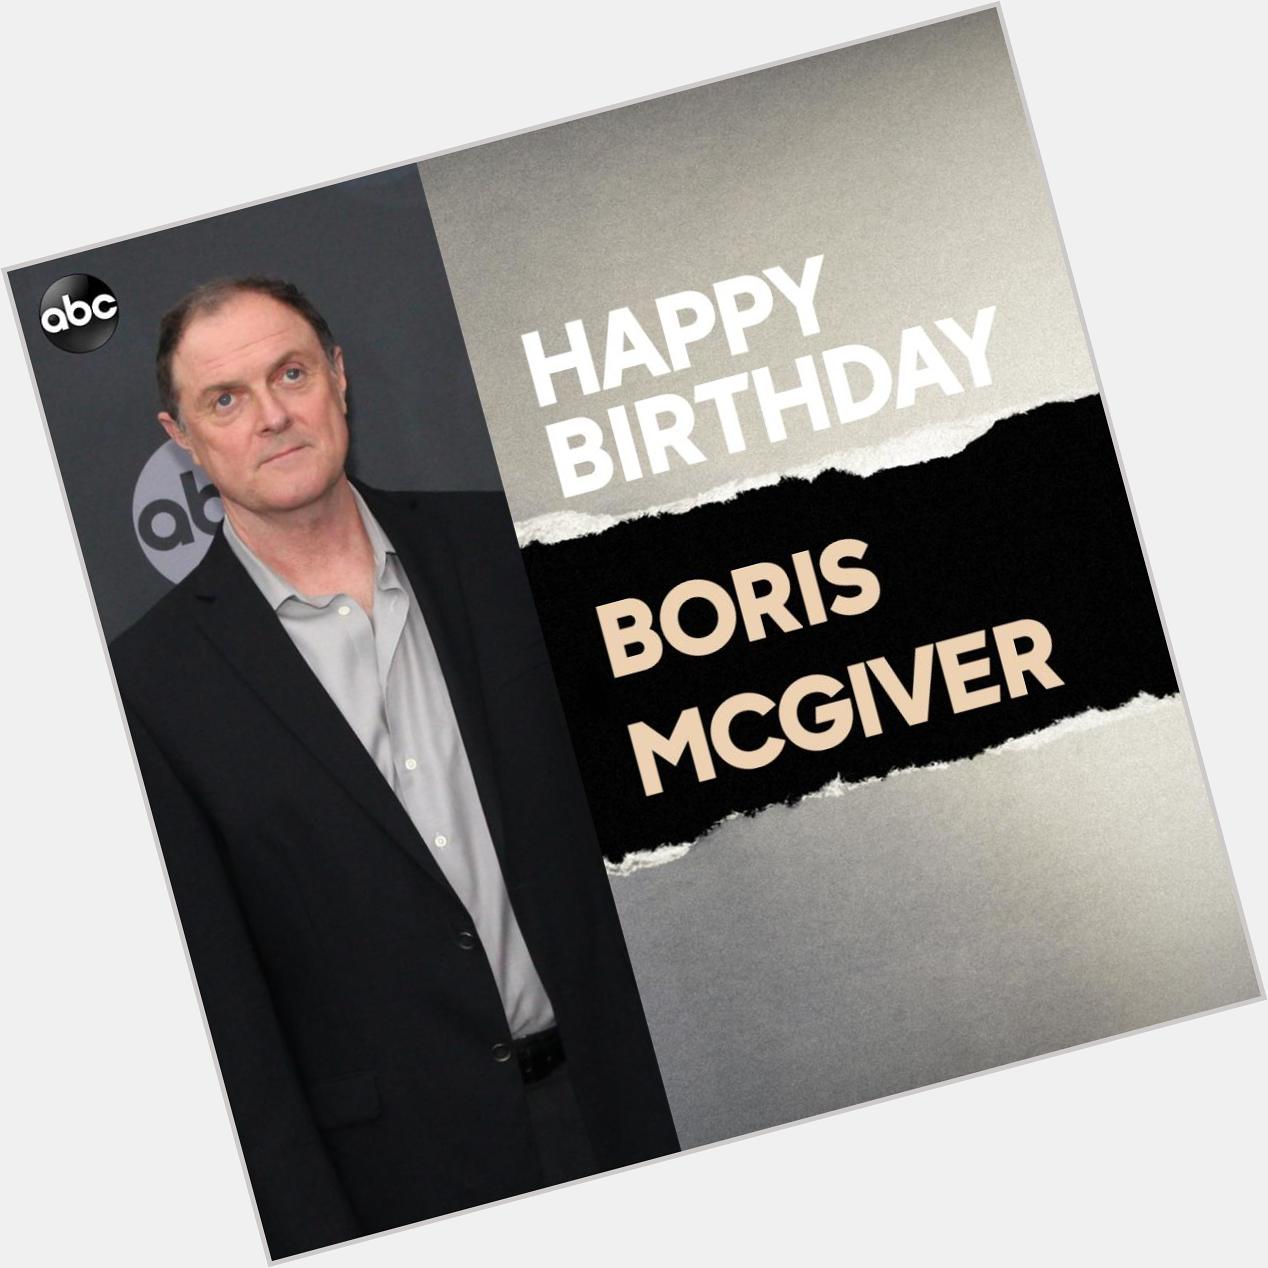 Happy birthday to Boris McGiver! Have an amazing day! 